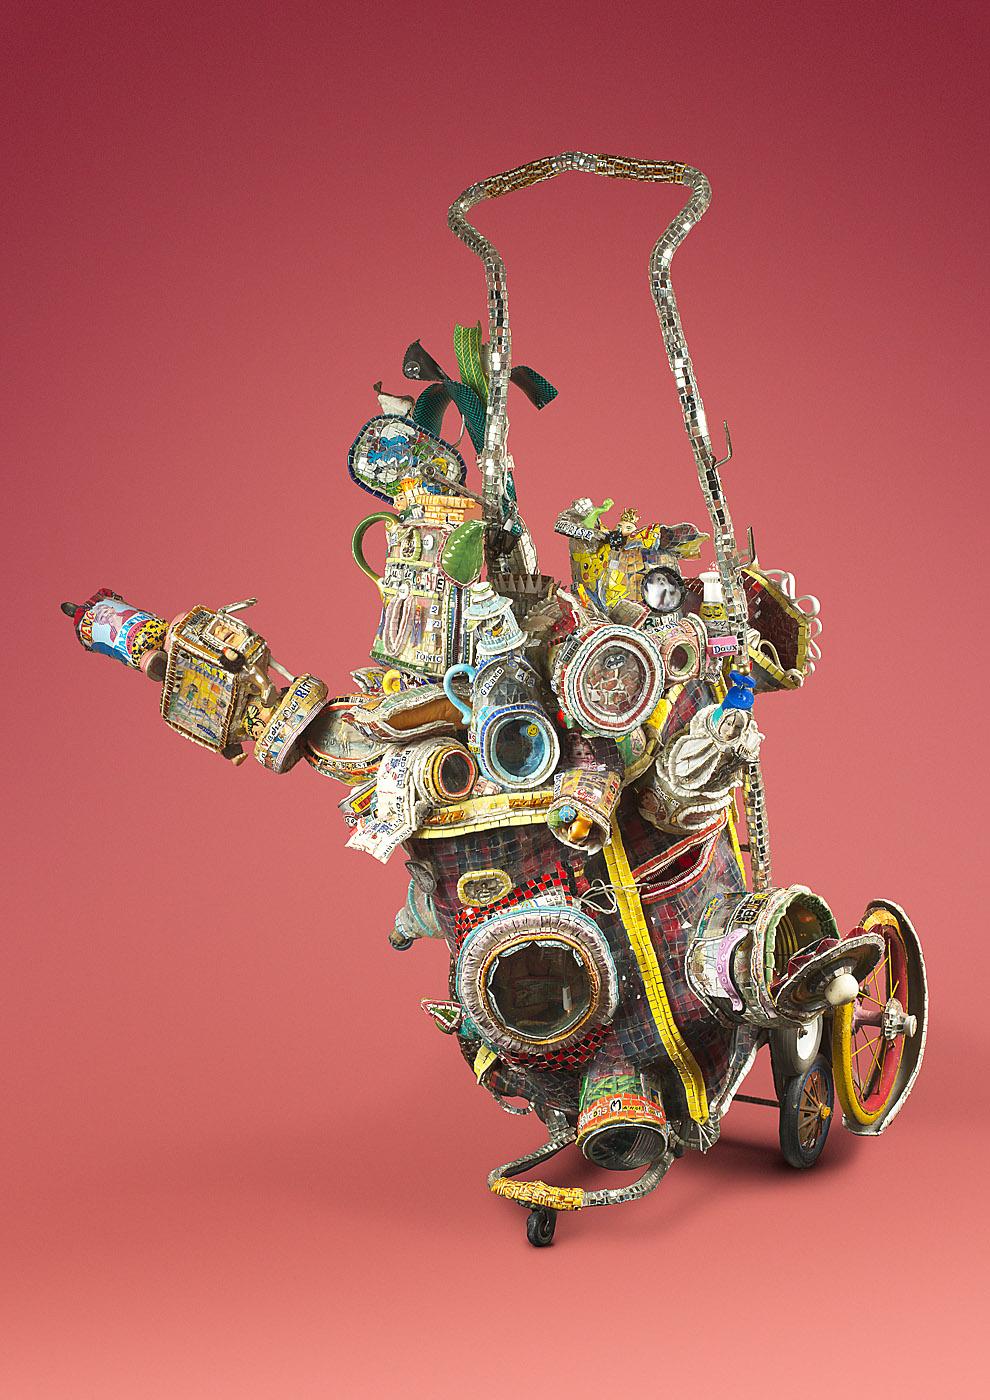 Monica Machado
Born in Lisbonne (Portugal) in 1966. Lives in Paris, since 1981.

Technique: Modified caddie, silicon glue and glass on fabric, lighting, magnifying glass, packages, bottles, cans, mouldy food, plastic, paper, mirror and fragments